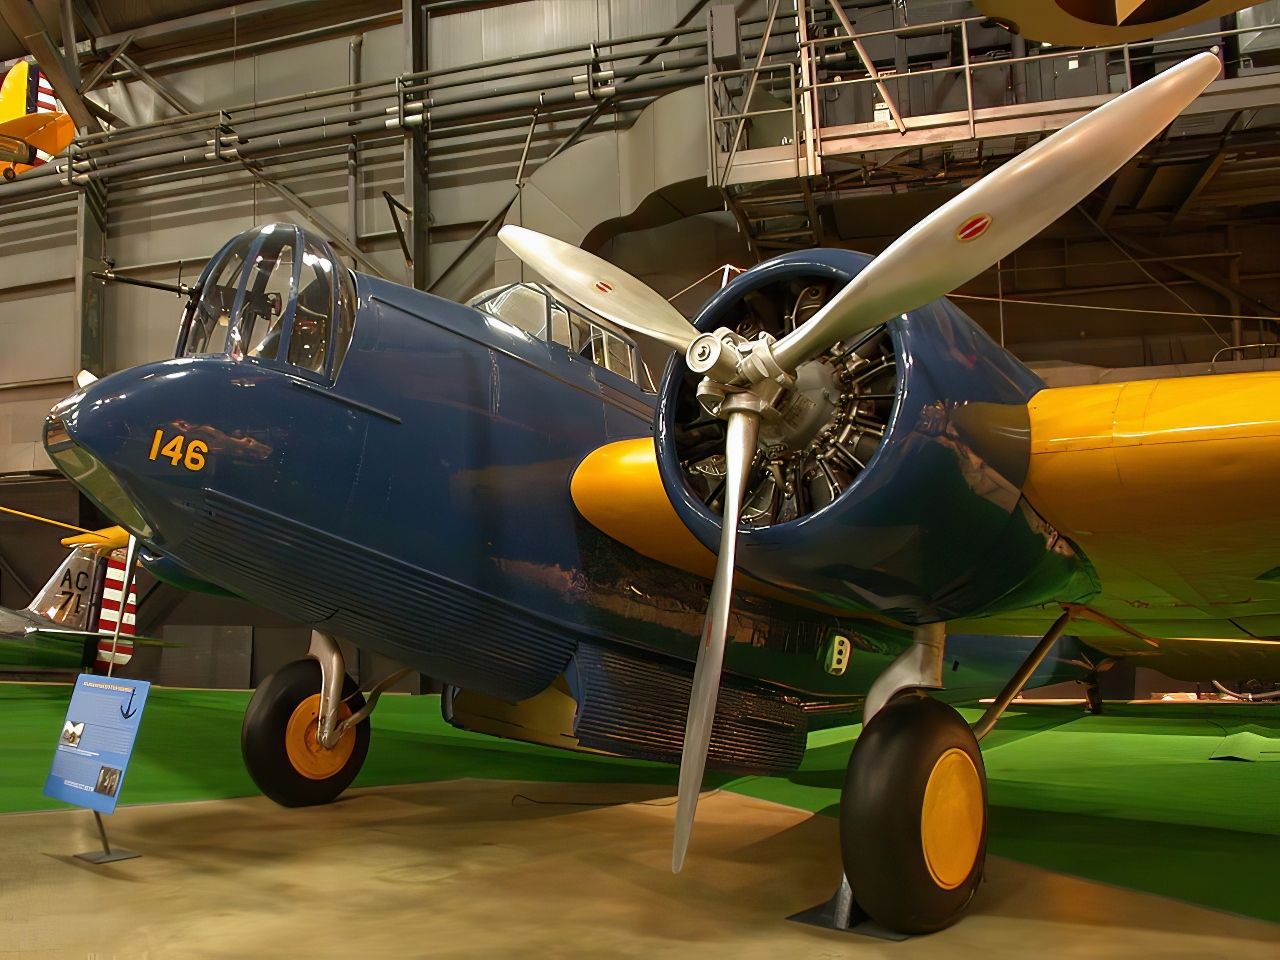 Martin YB-10 in the National Museum of the United States Air Force